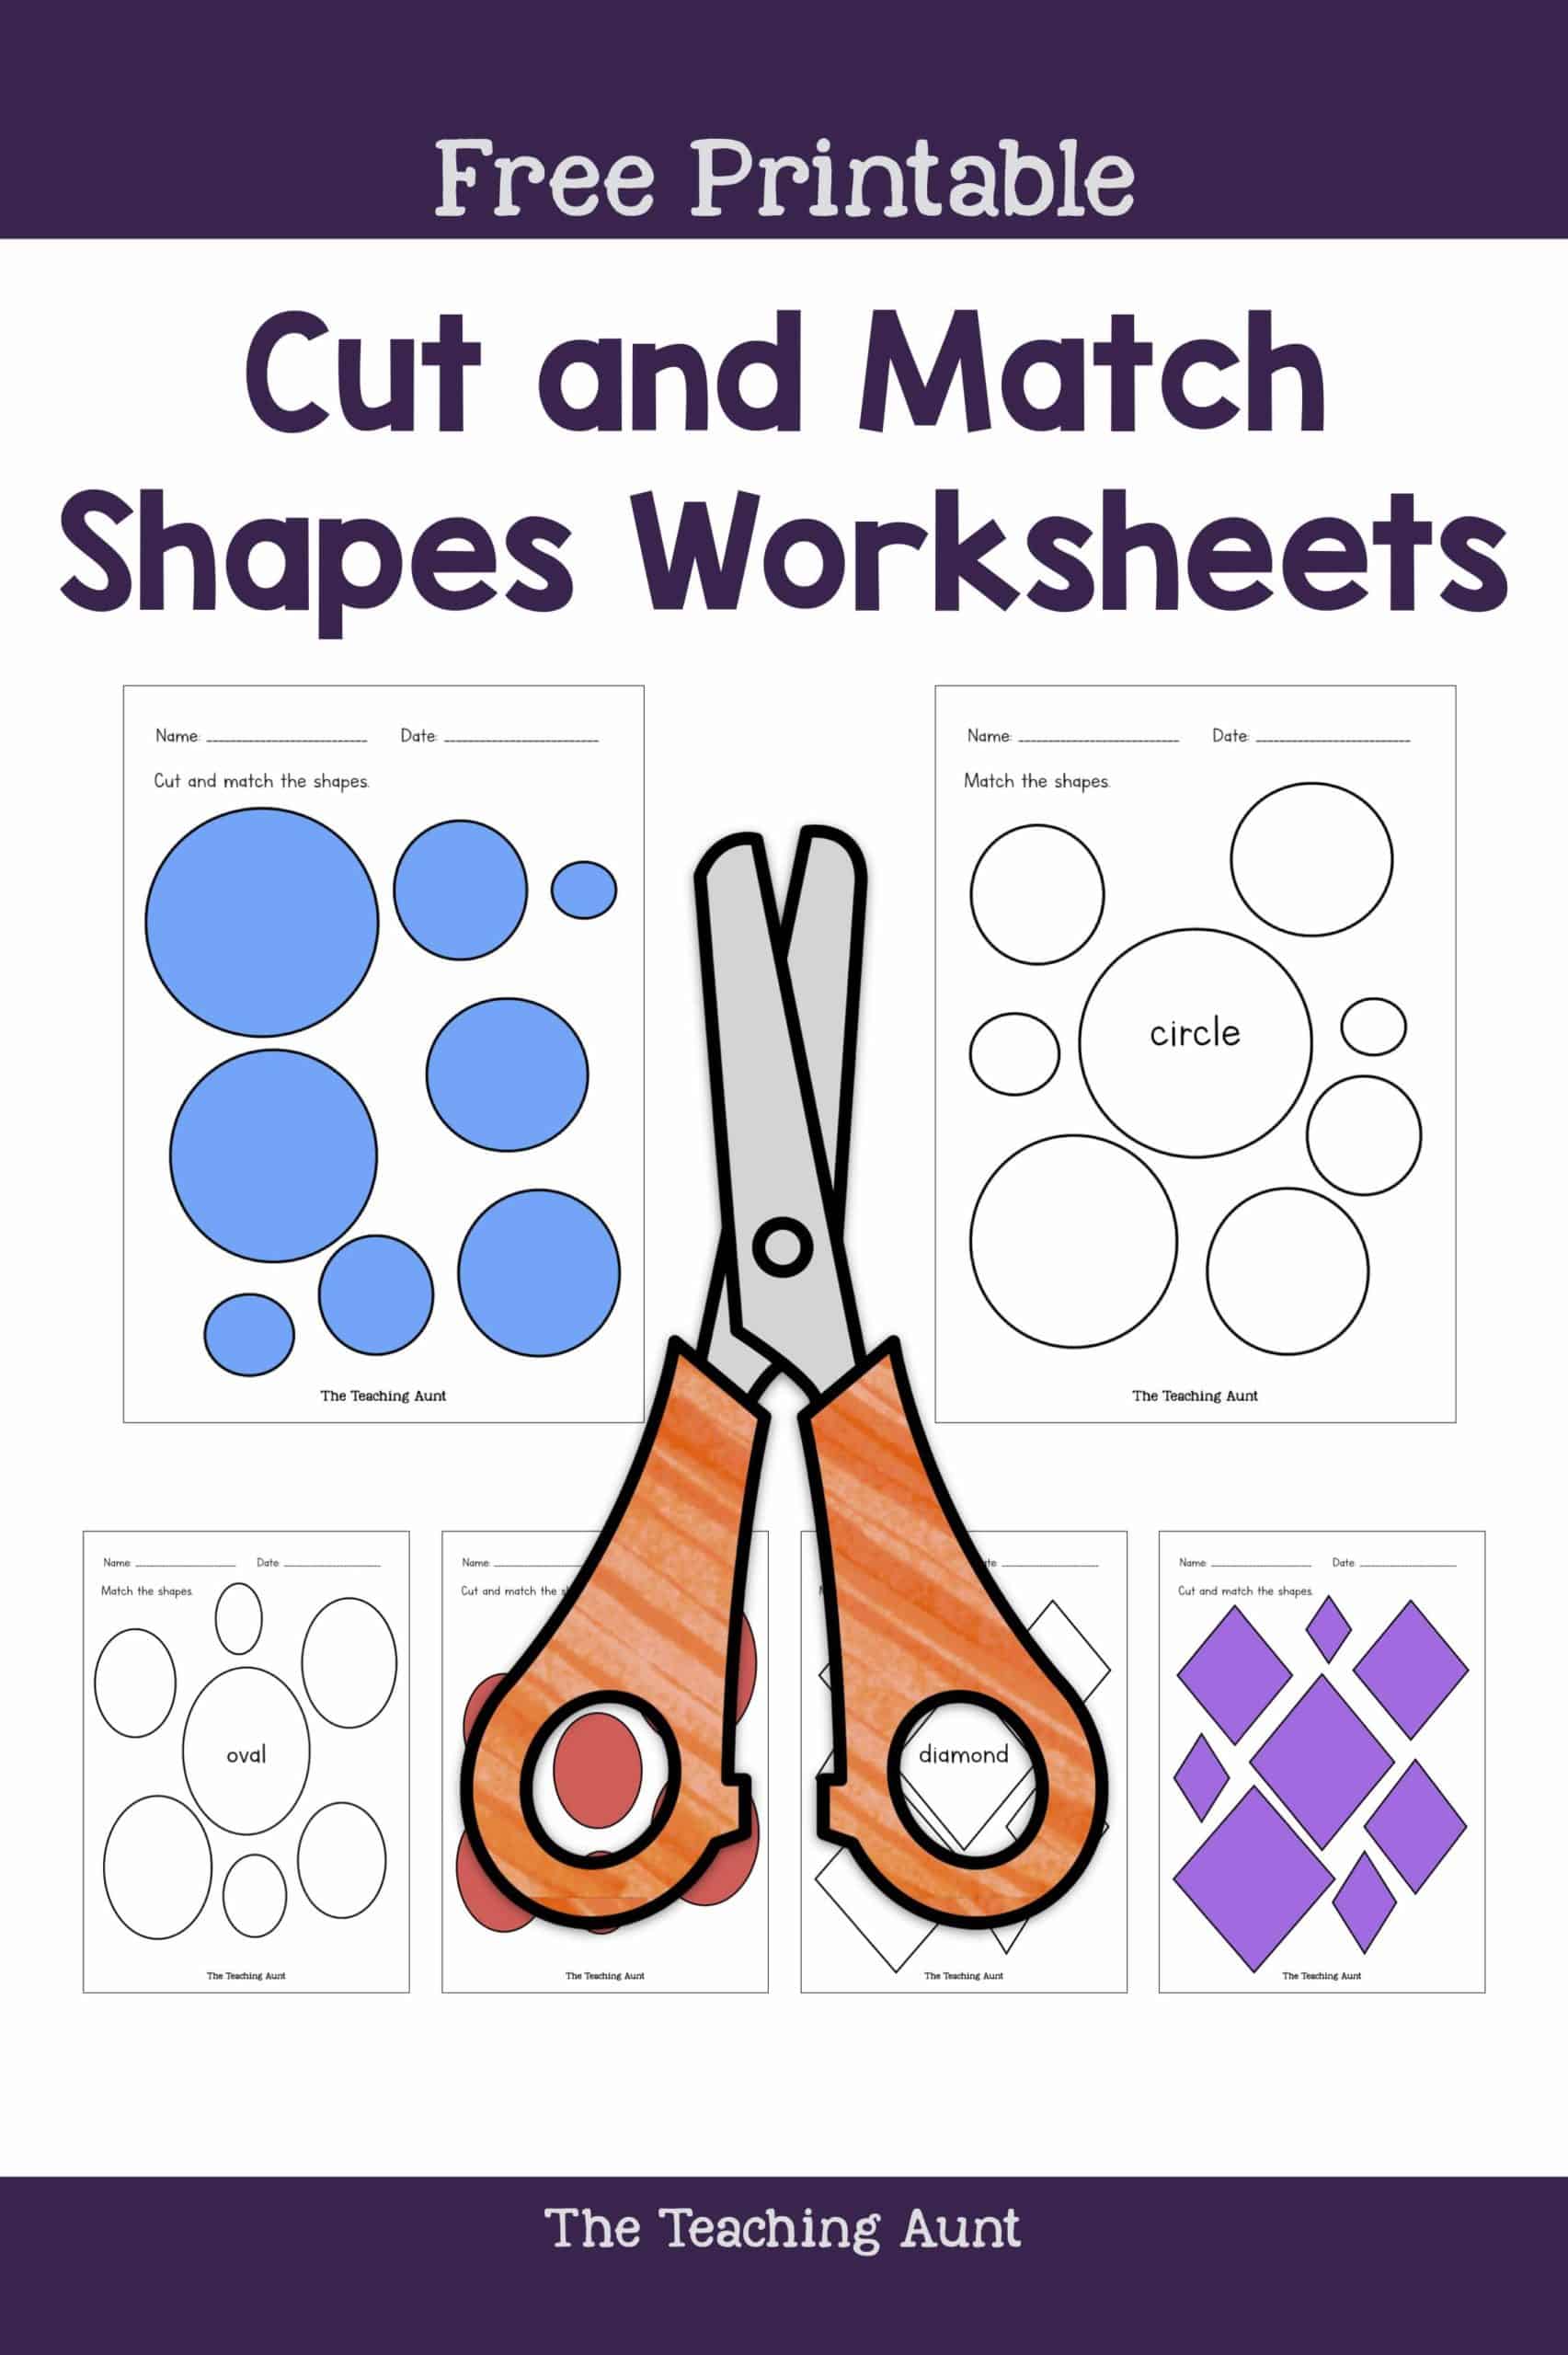 Cut and Match Shapes Worksheets Free Printable